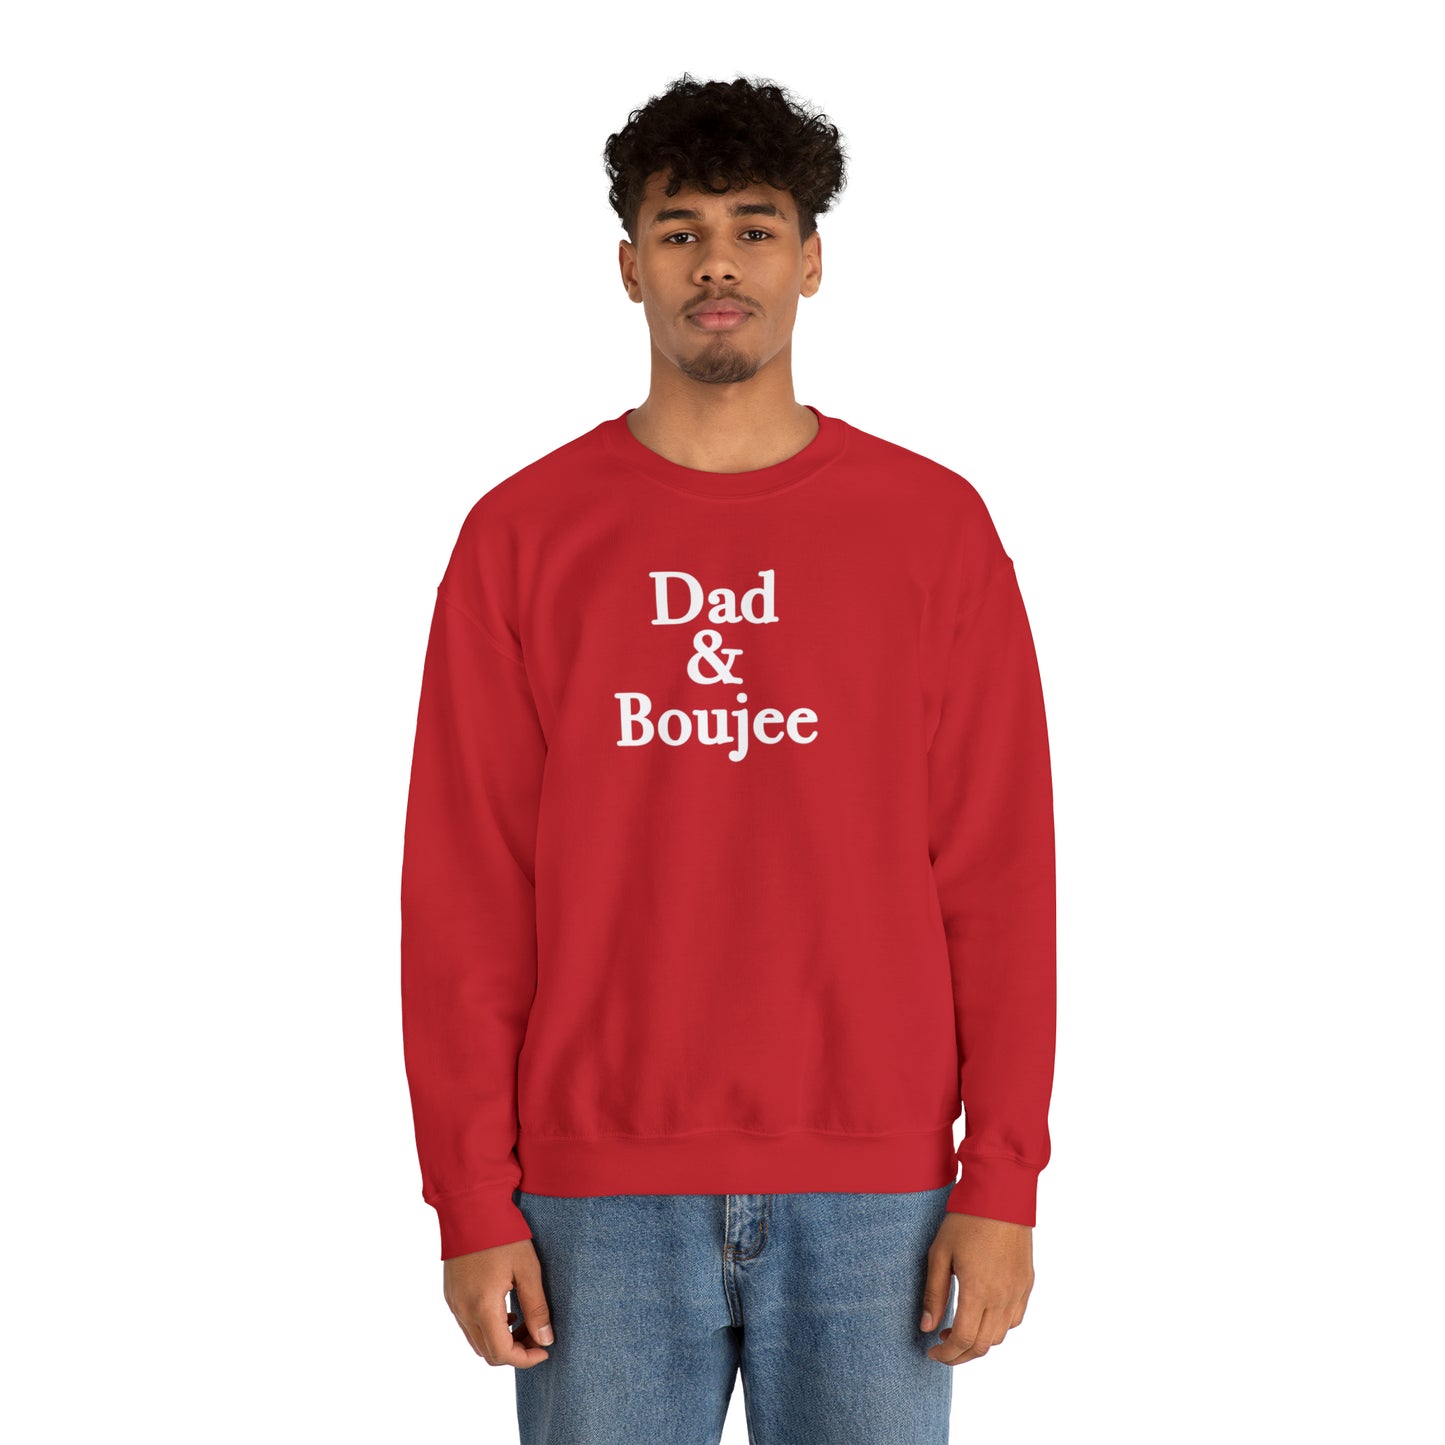 Dad & Boujee Crewneck Sweatshirt Great Father's Day Gift for Dad, Dad and Boujee Hoodie Sweatshirt for Dad